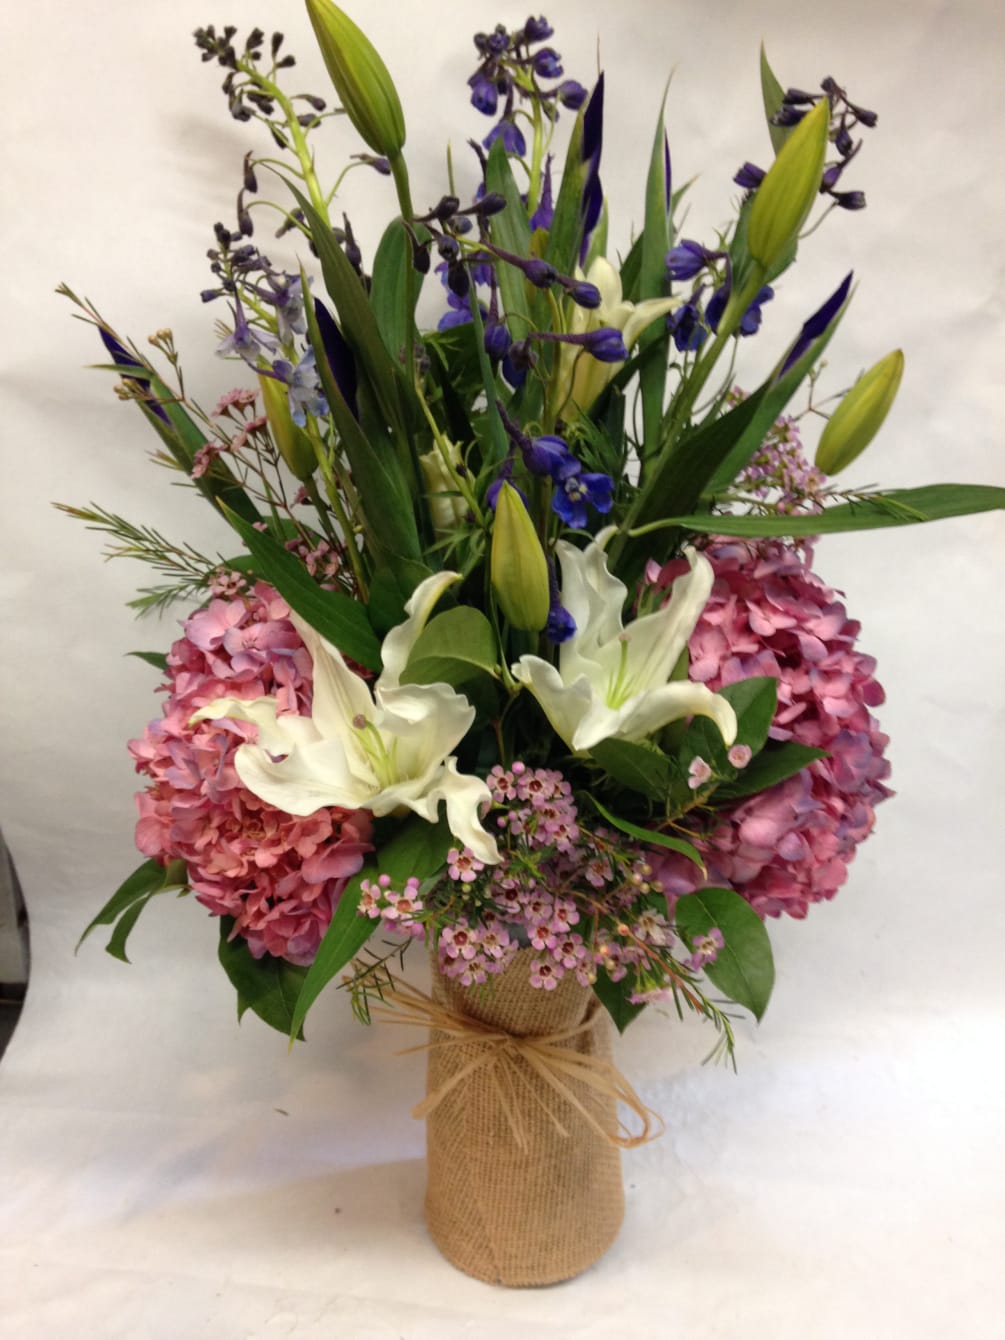 This joyful vase arrangement looks sweet for any occassion. Featuring pink hydrangea